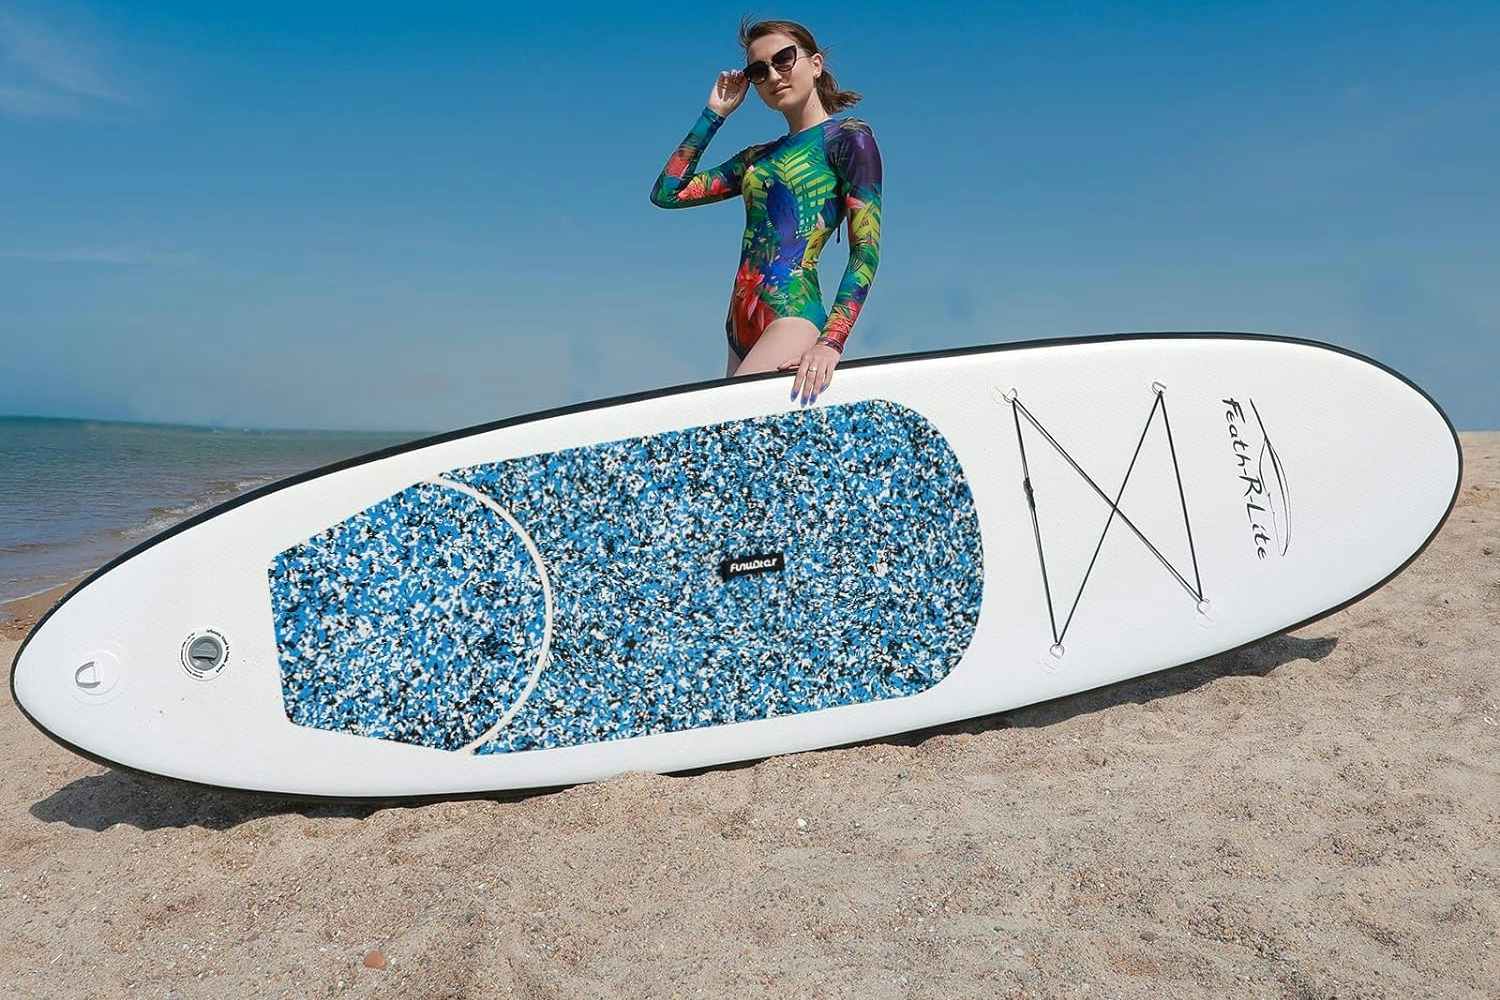 Inflatable Stand-Up Paddle Board, Only $80 on Amazon (Reg. $200)